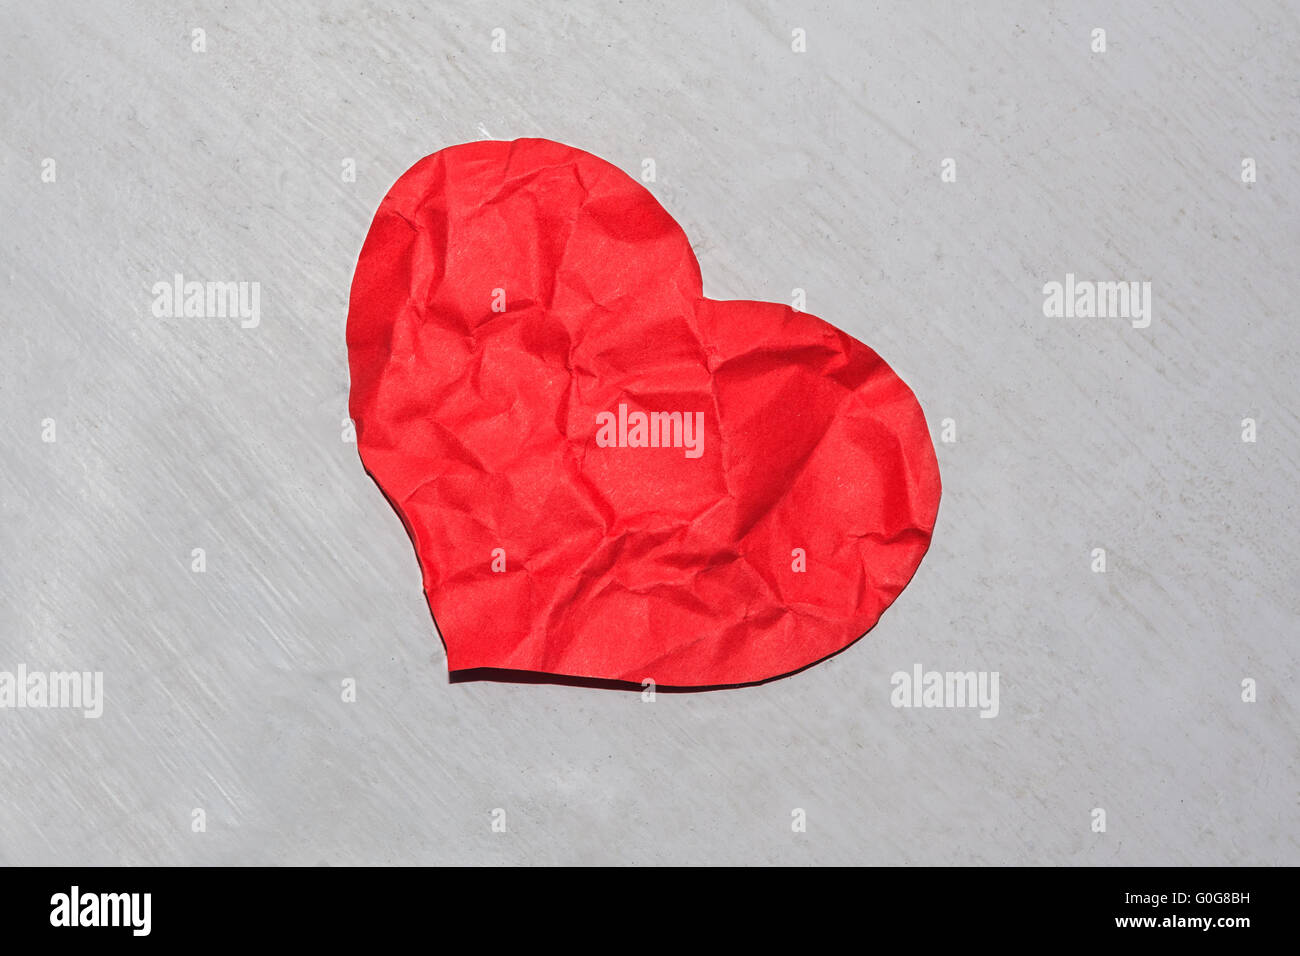 Crumpled red paper heart Stock Photo